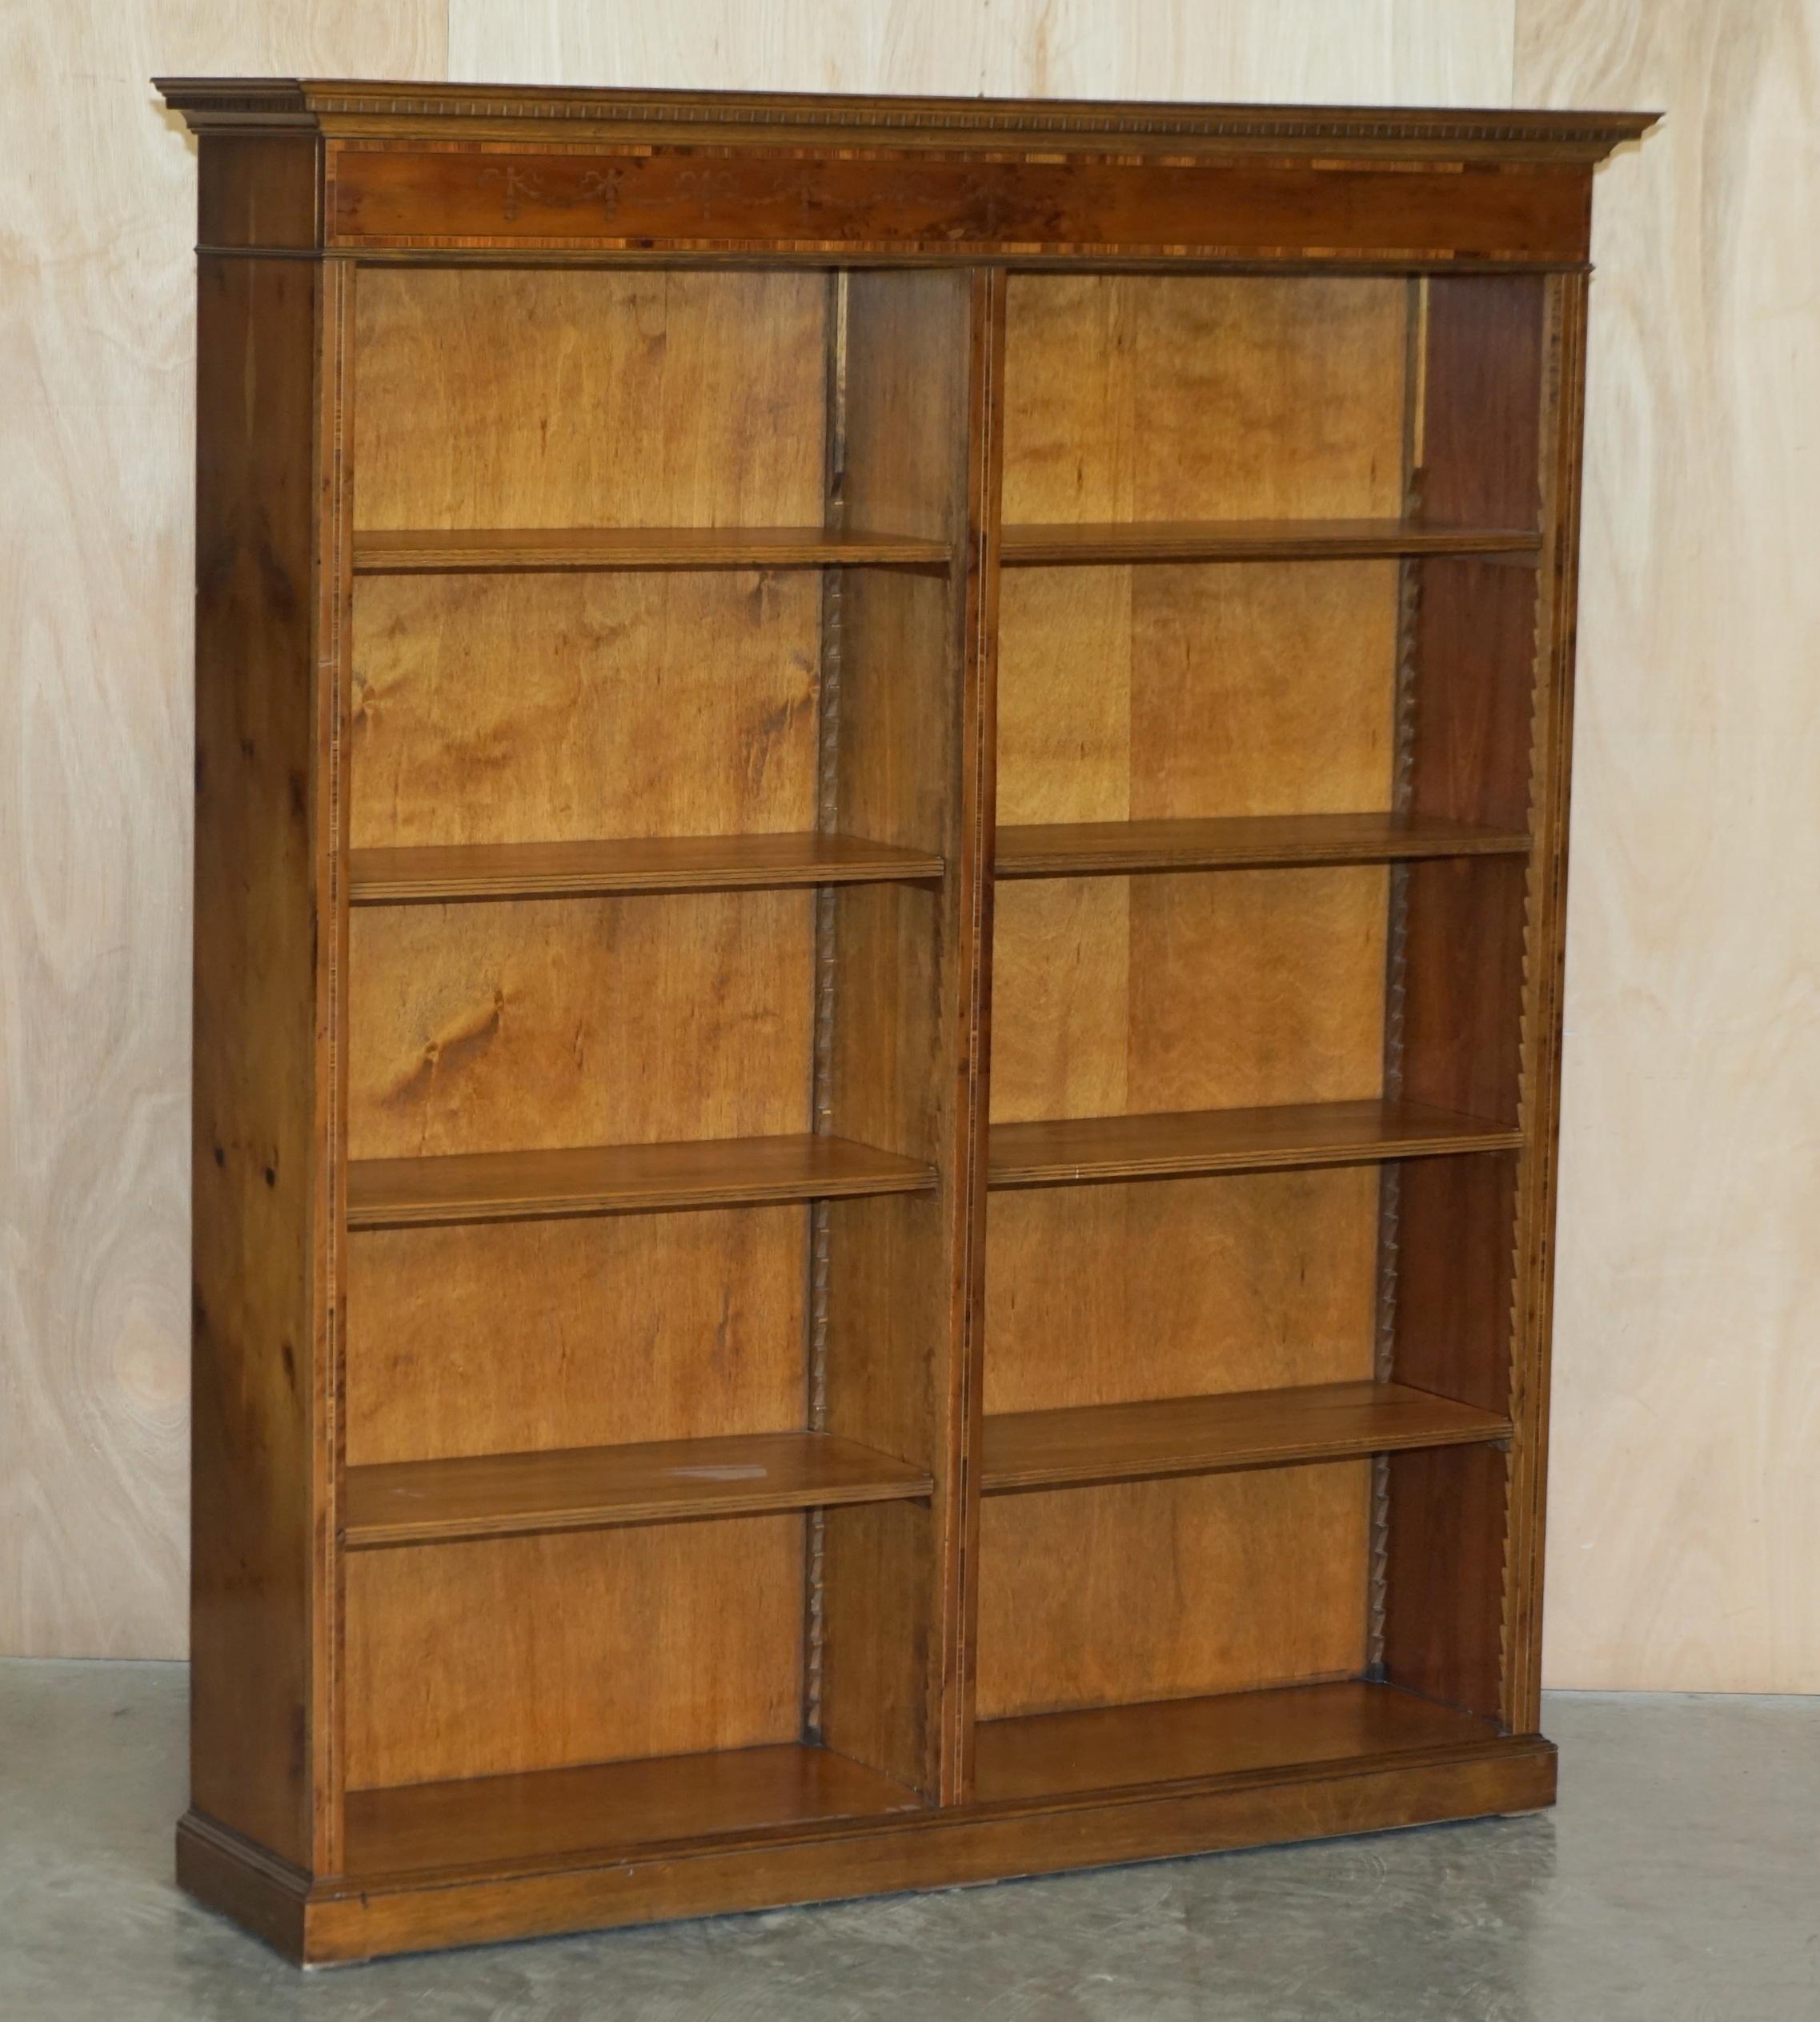 We are delighted to offer for this stunning pair of Sheraton Revival large open library bookcases in light satinwood with burr walnut & yew

A very good looking well made and decorative pair, the shelves are all height adjustable and or removable